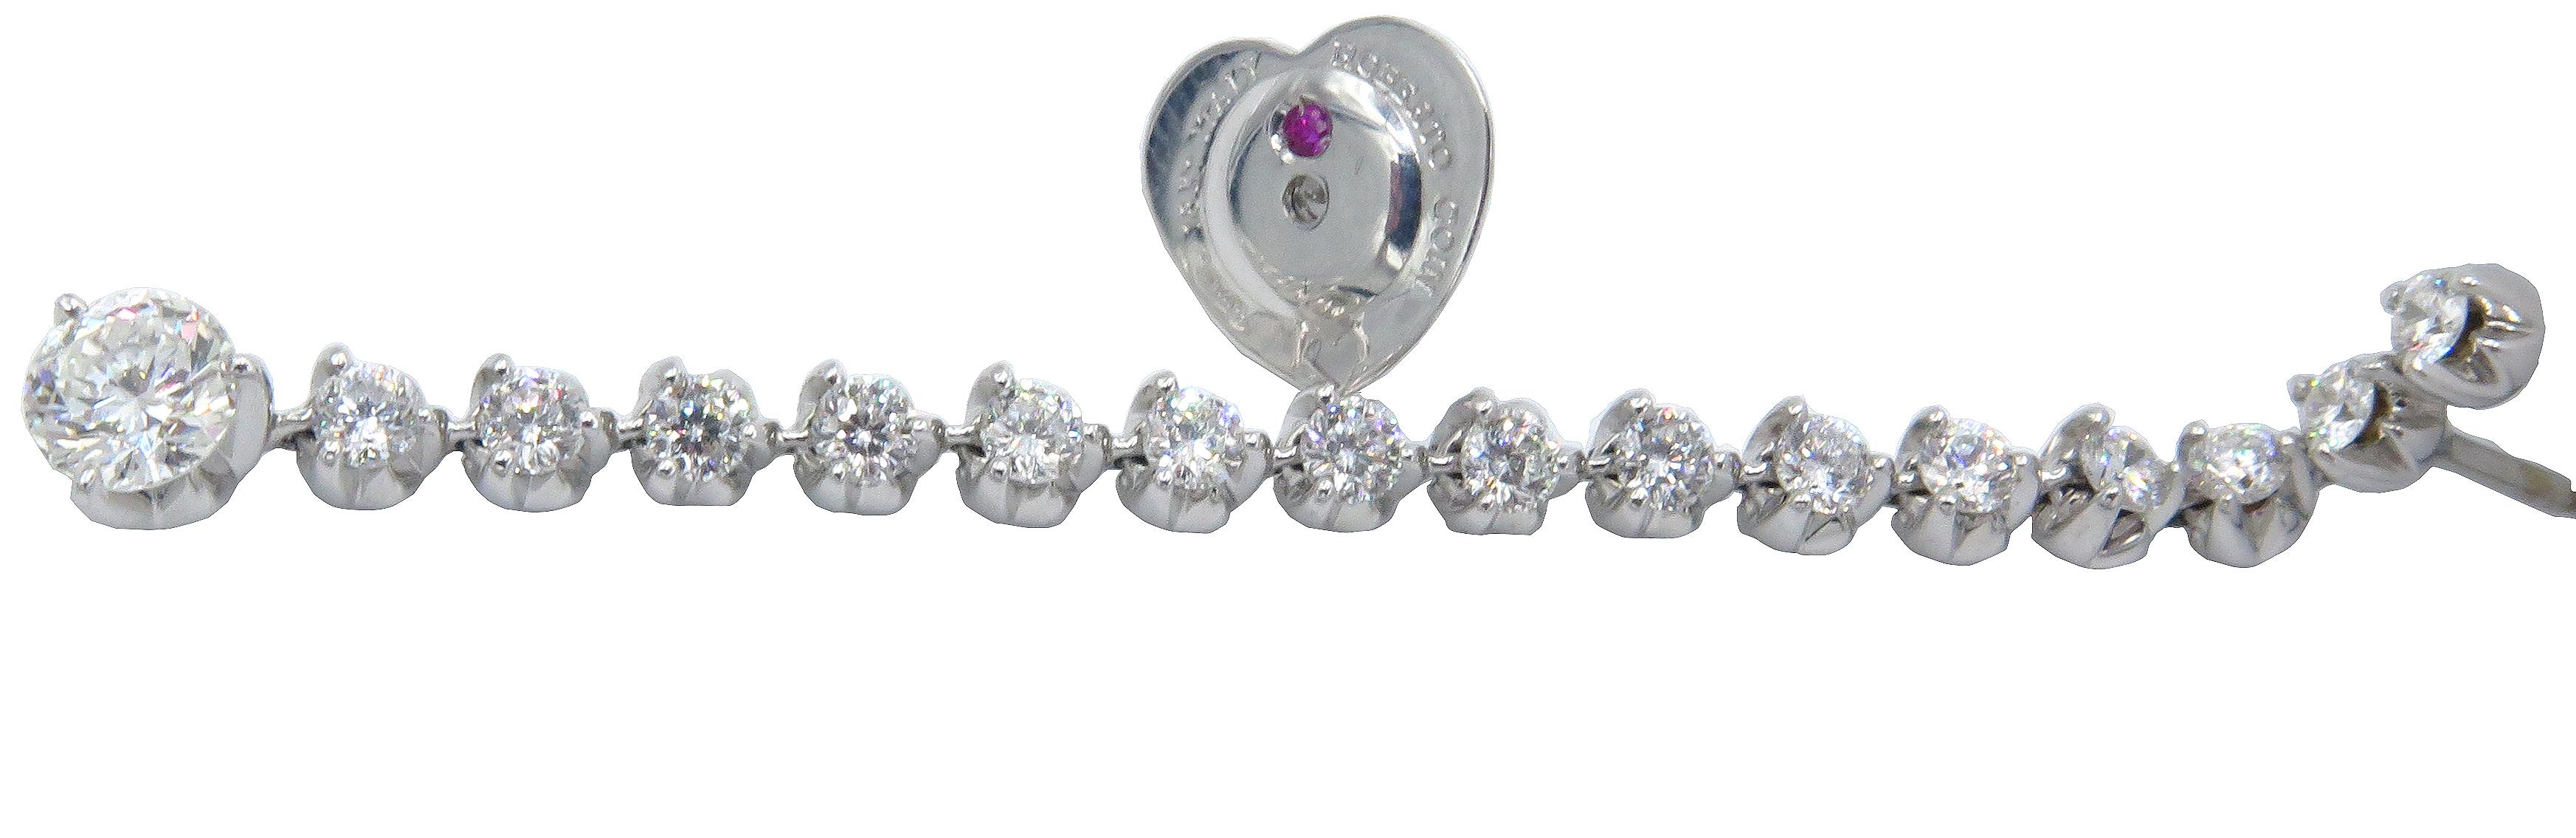 Beautiful, 18kt white gold Roberto Coin diamond strand earrings with 15 beautiful small round diamonds and a 0.5ct diamond at the bottom of the strand. Properly signed and hallmarked in the post clip by Roberto Coin signature ruby, there is also